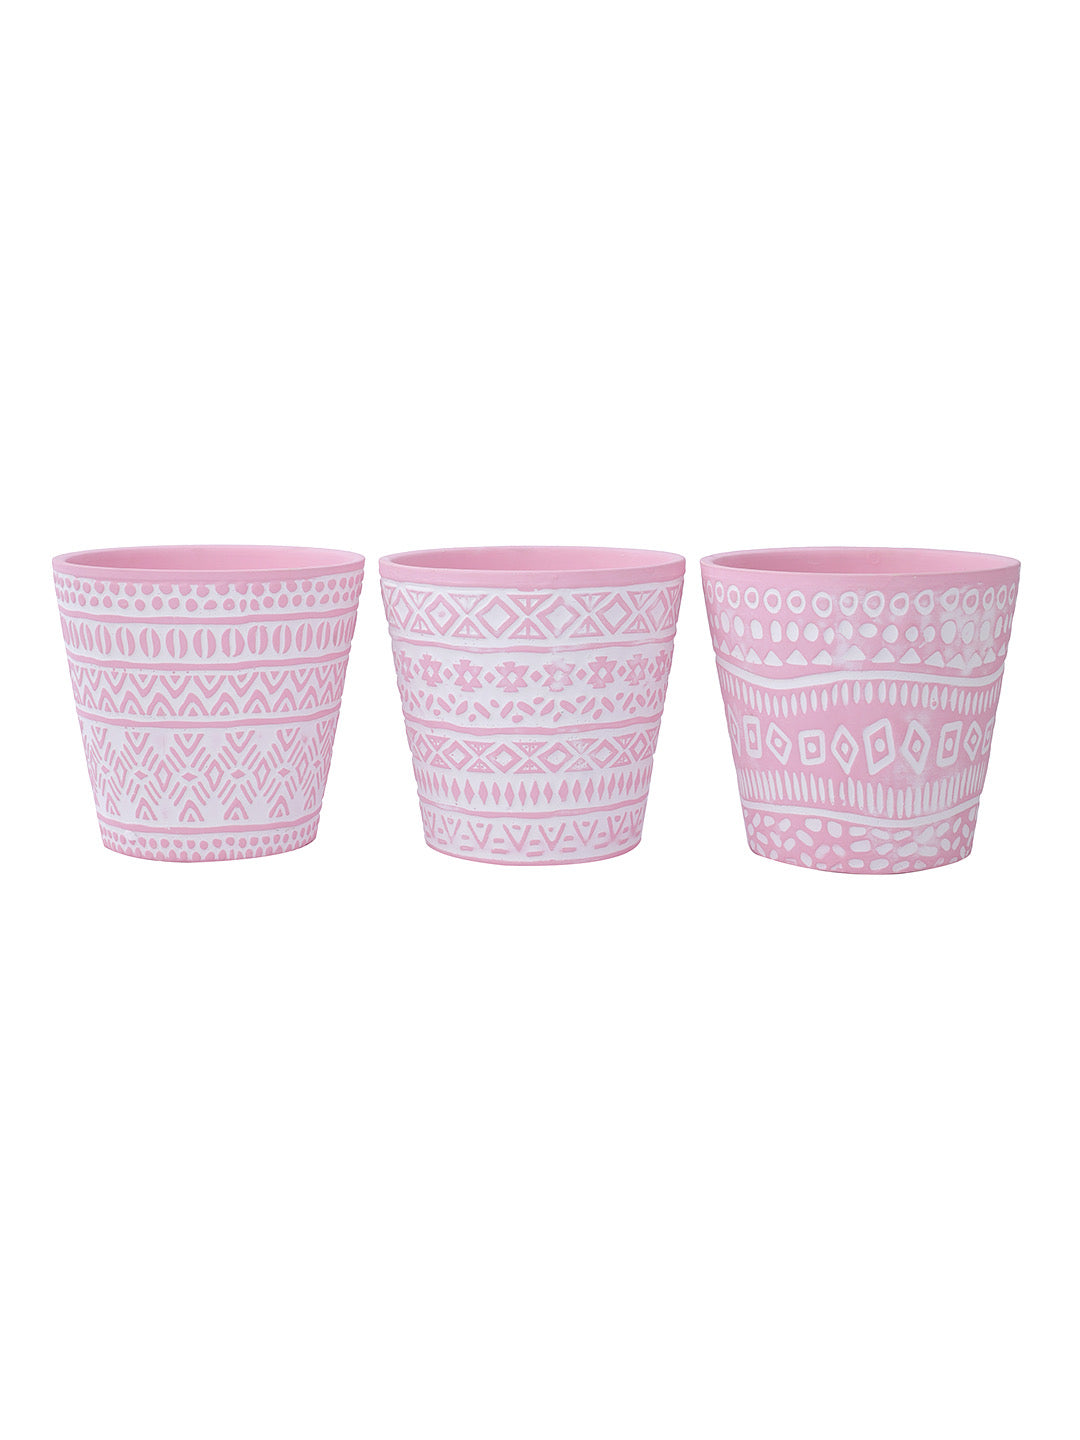 Set of 3 bright colored Planters with white tribal design - Default Title (CH210110_3)